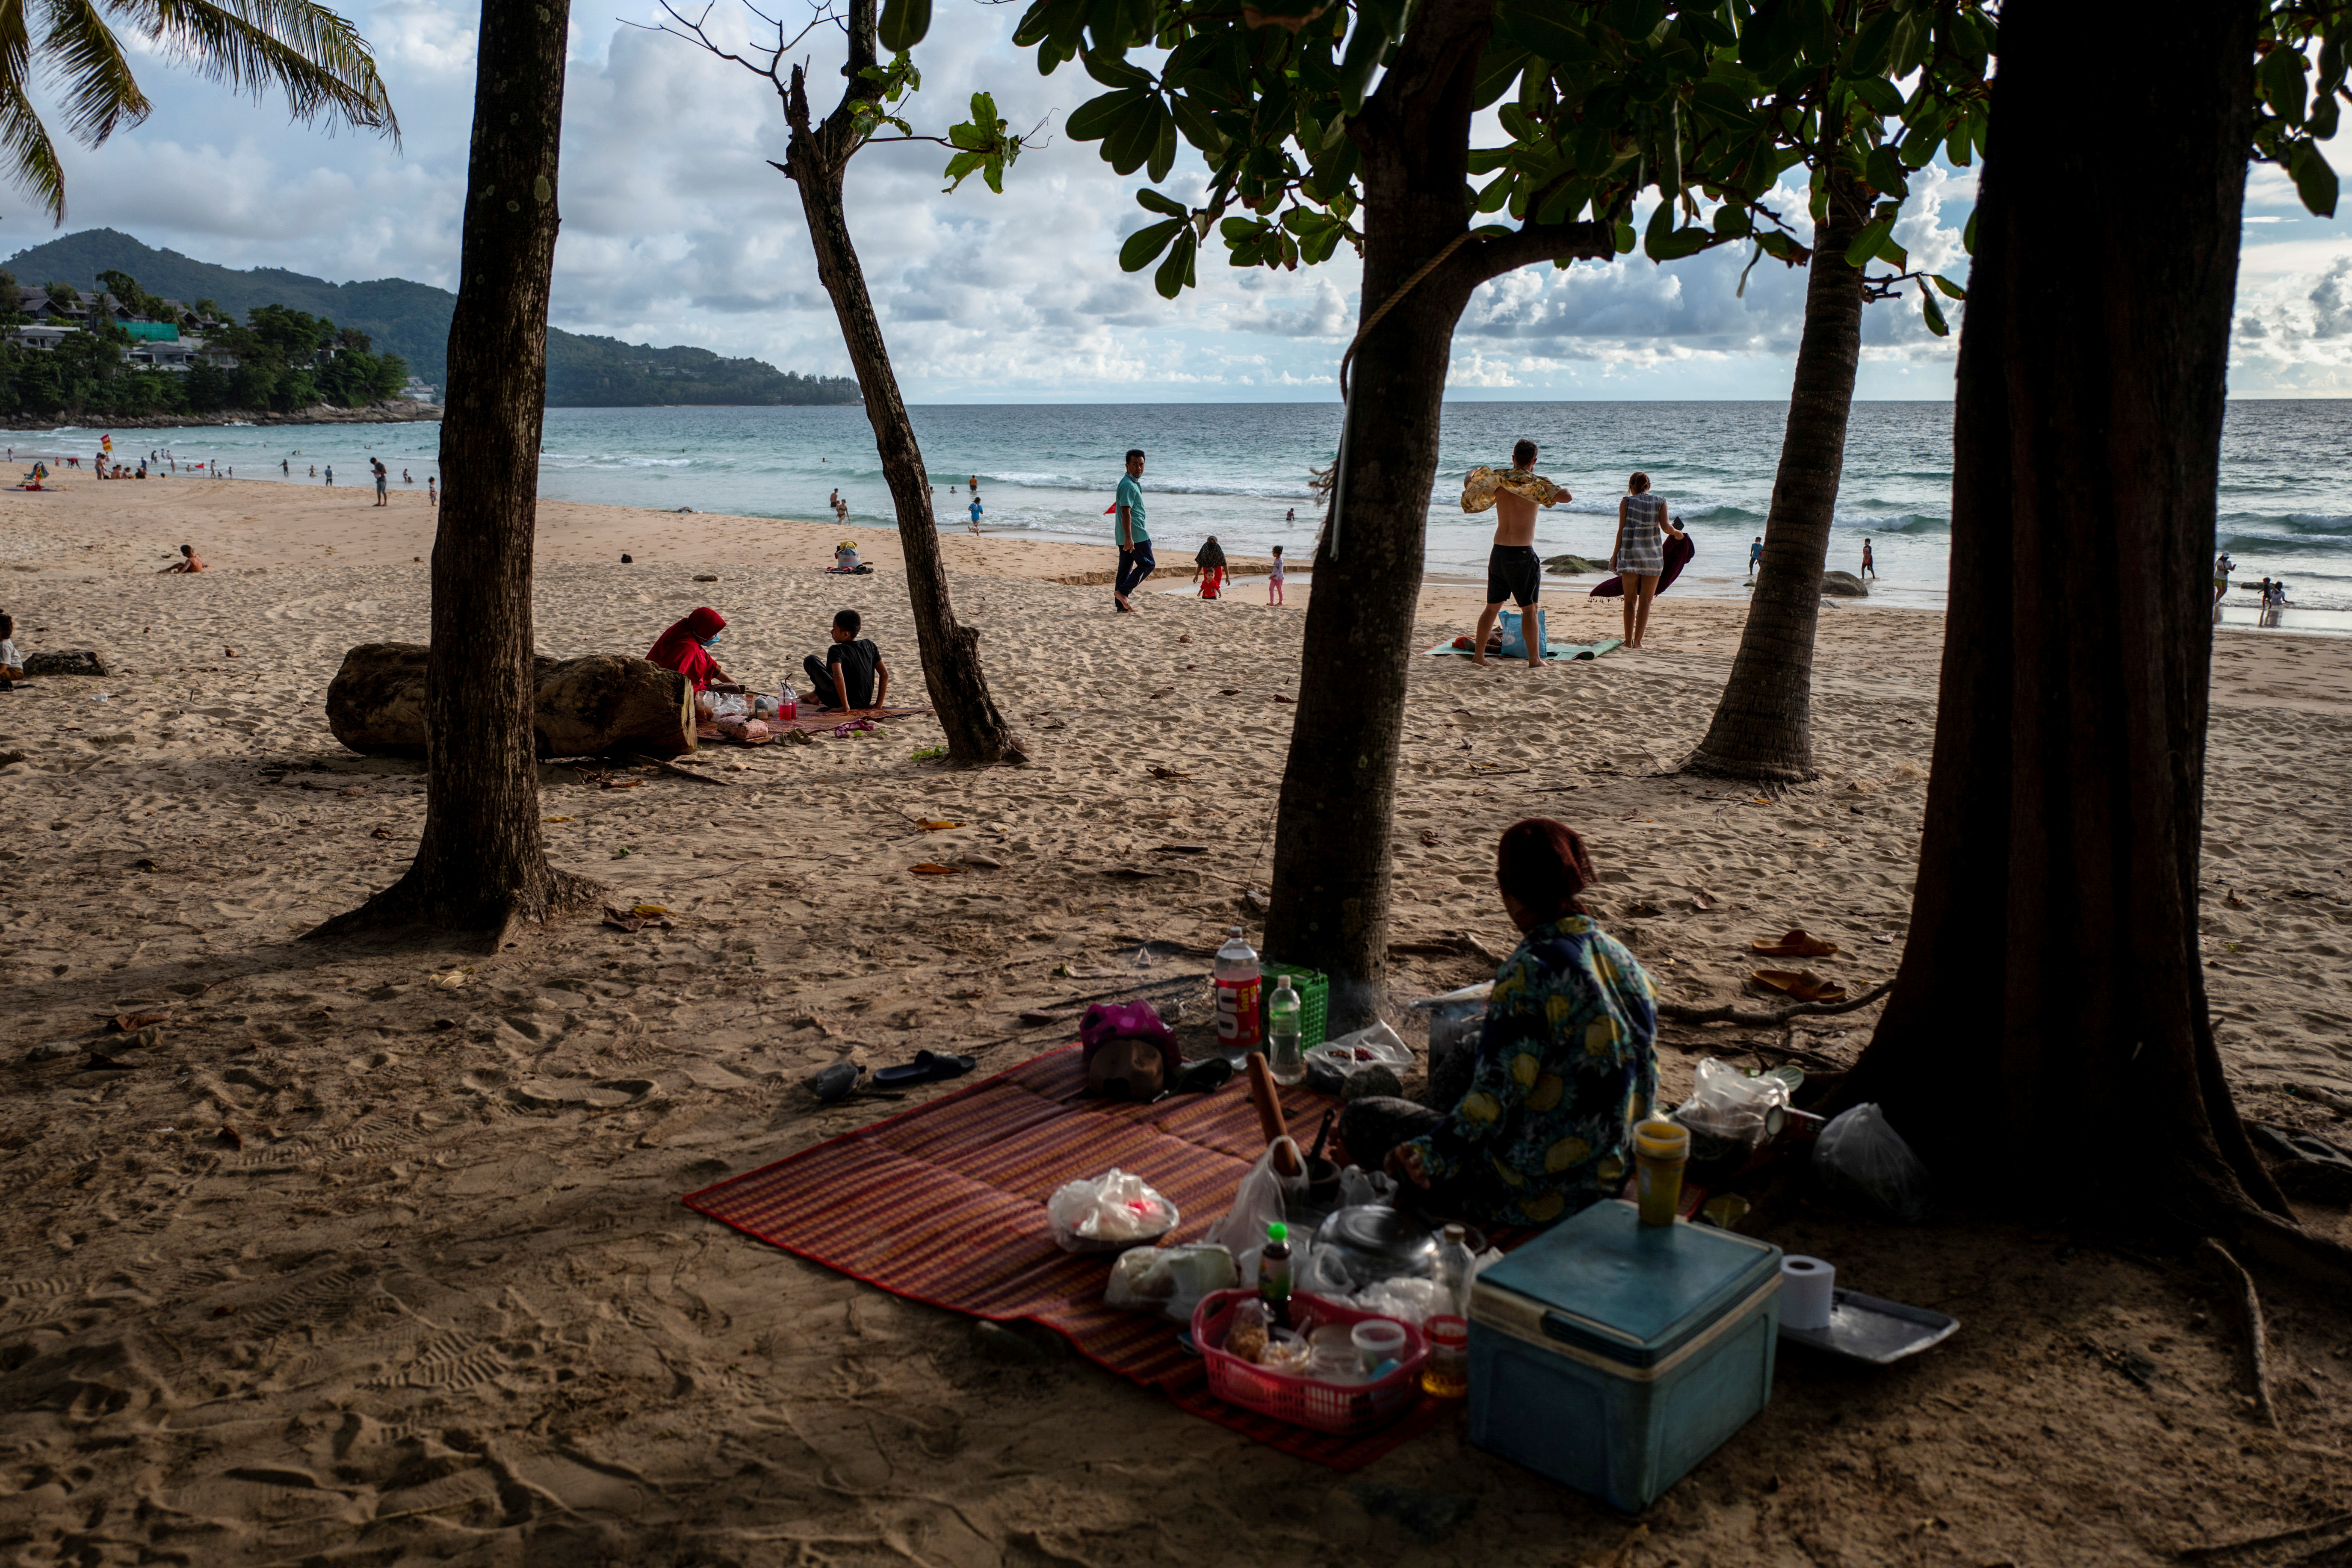 People enjoy at a beach as Phuket opens for foreigners, who are fully vaccinated against the coronavirus disease (COVID-19), to visit the resort island without quarantine, in Phuket, Thailand, September 19, 2021. REUTERS/Athit Perawongmetha/File Photo